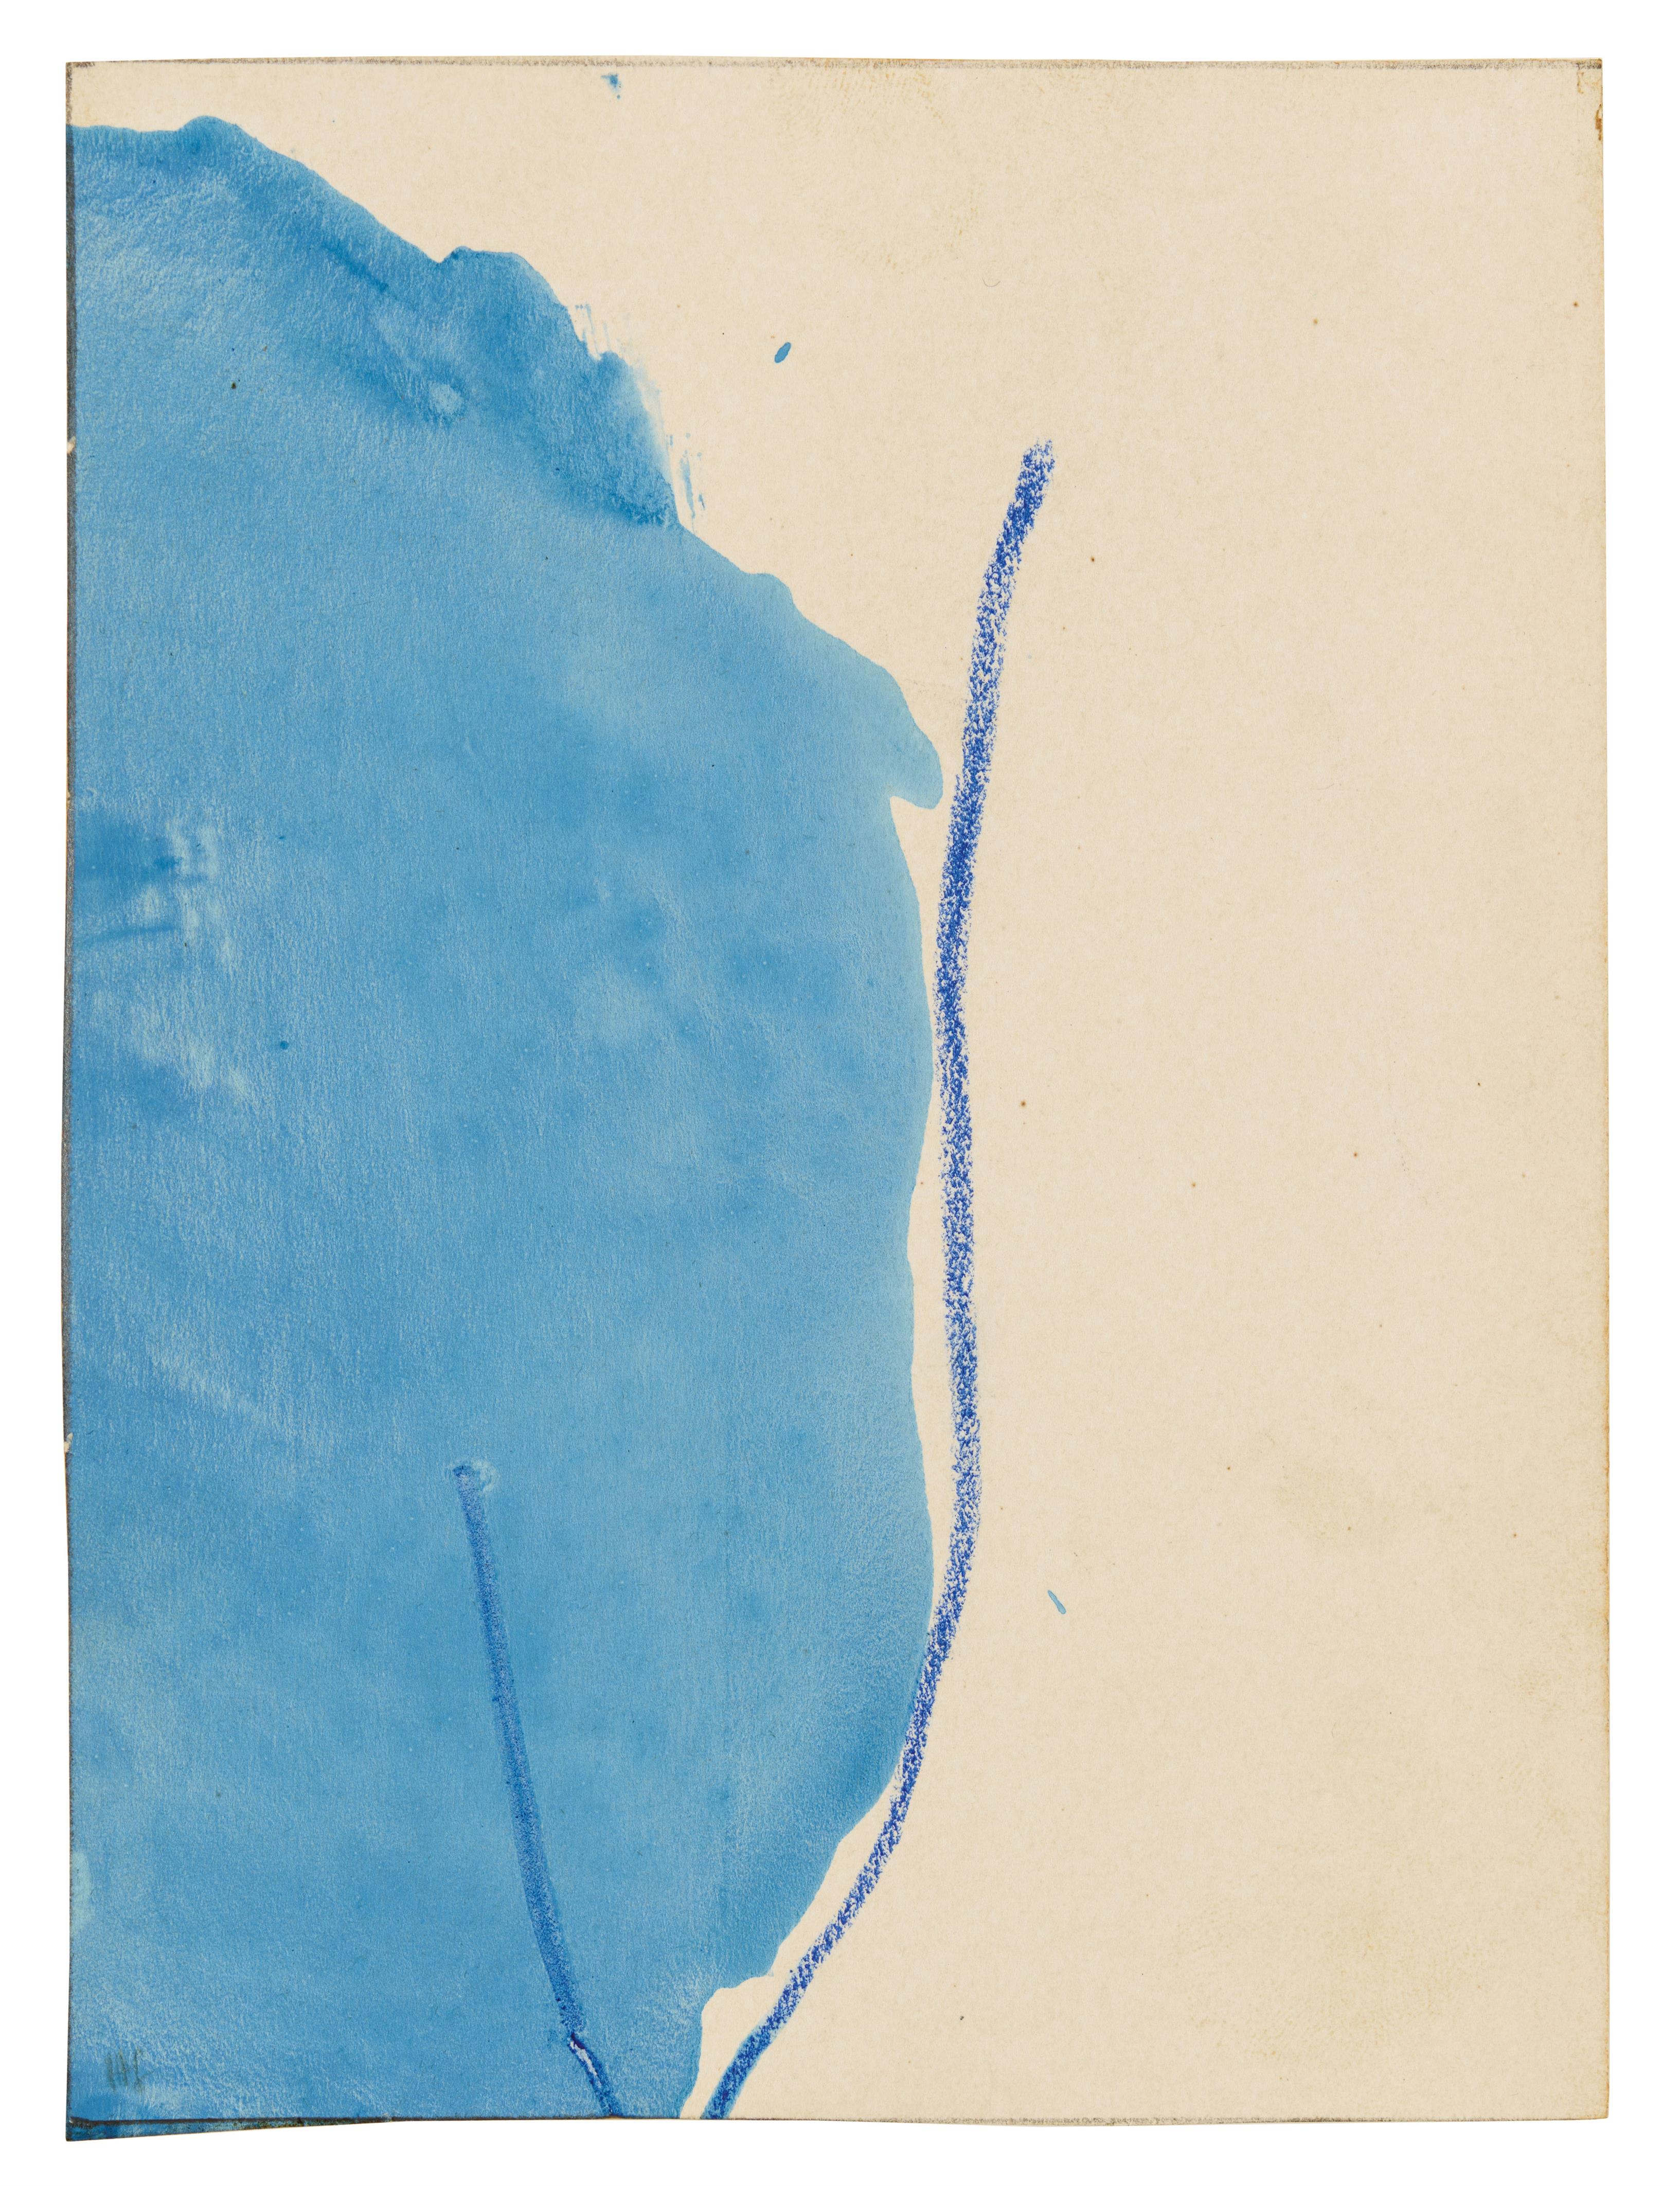 Helen Frankenthaler - Untitled (Original cover for "The Blue Stairs", a book of poetry by Barbara Guest) - image-1